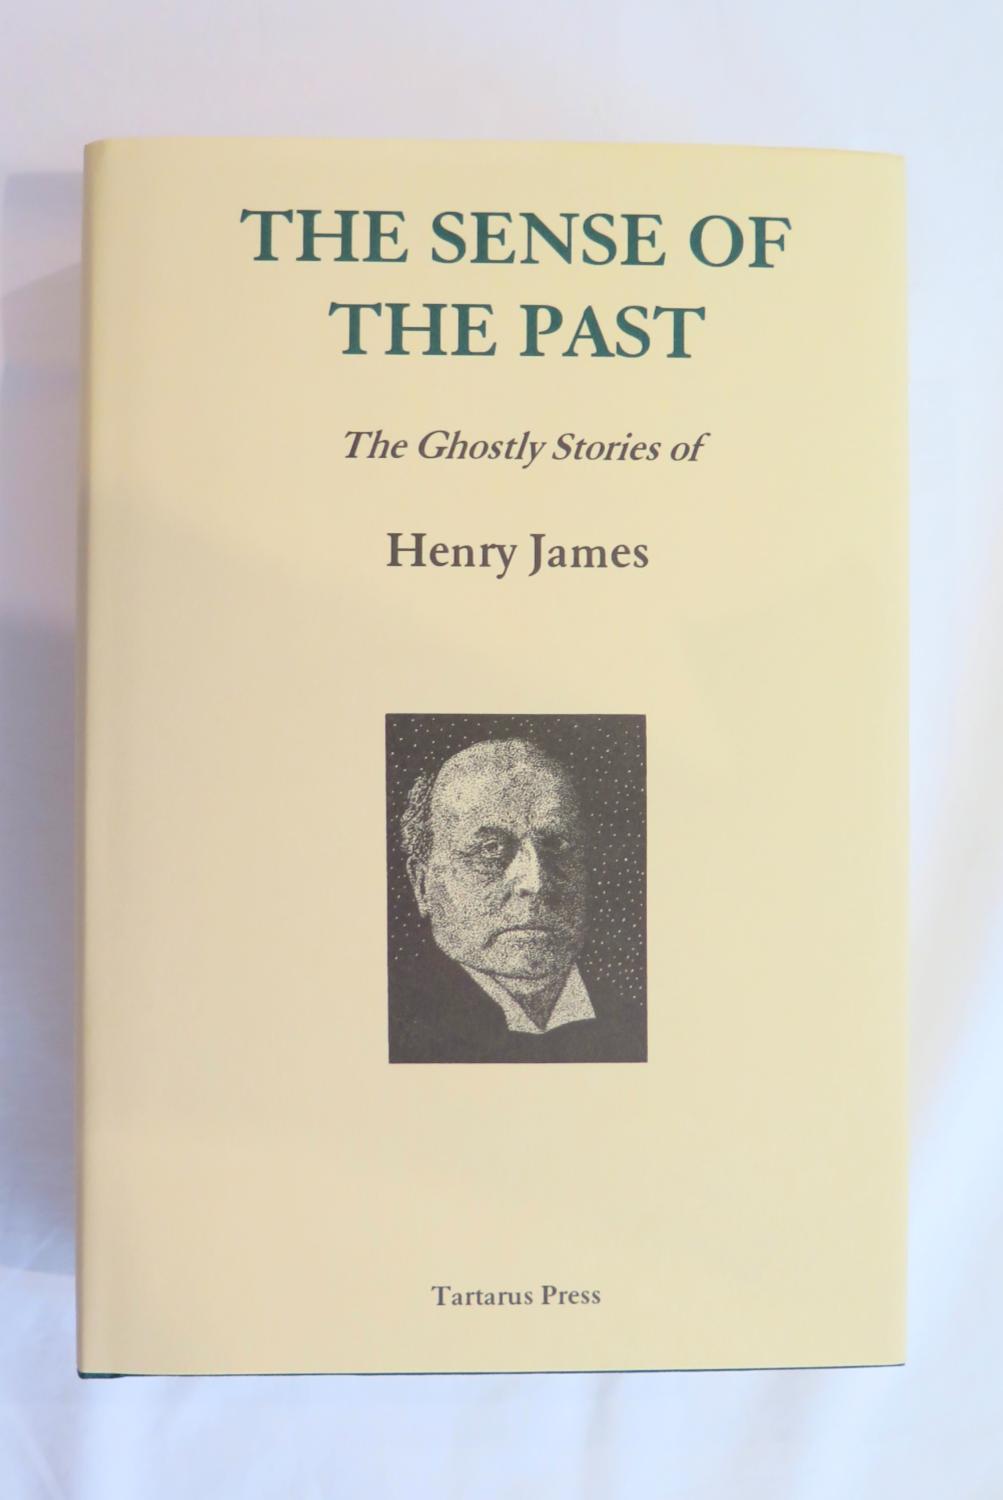 Sense of the Past (The) UK LIMITED FIRST EDITION - James, Henry